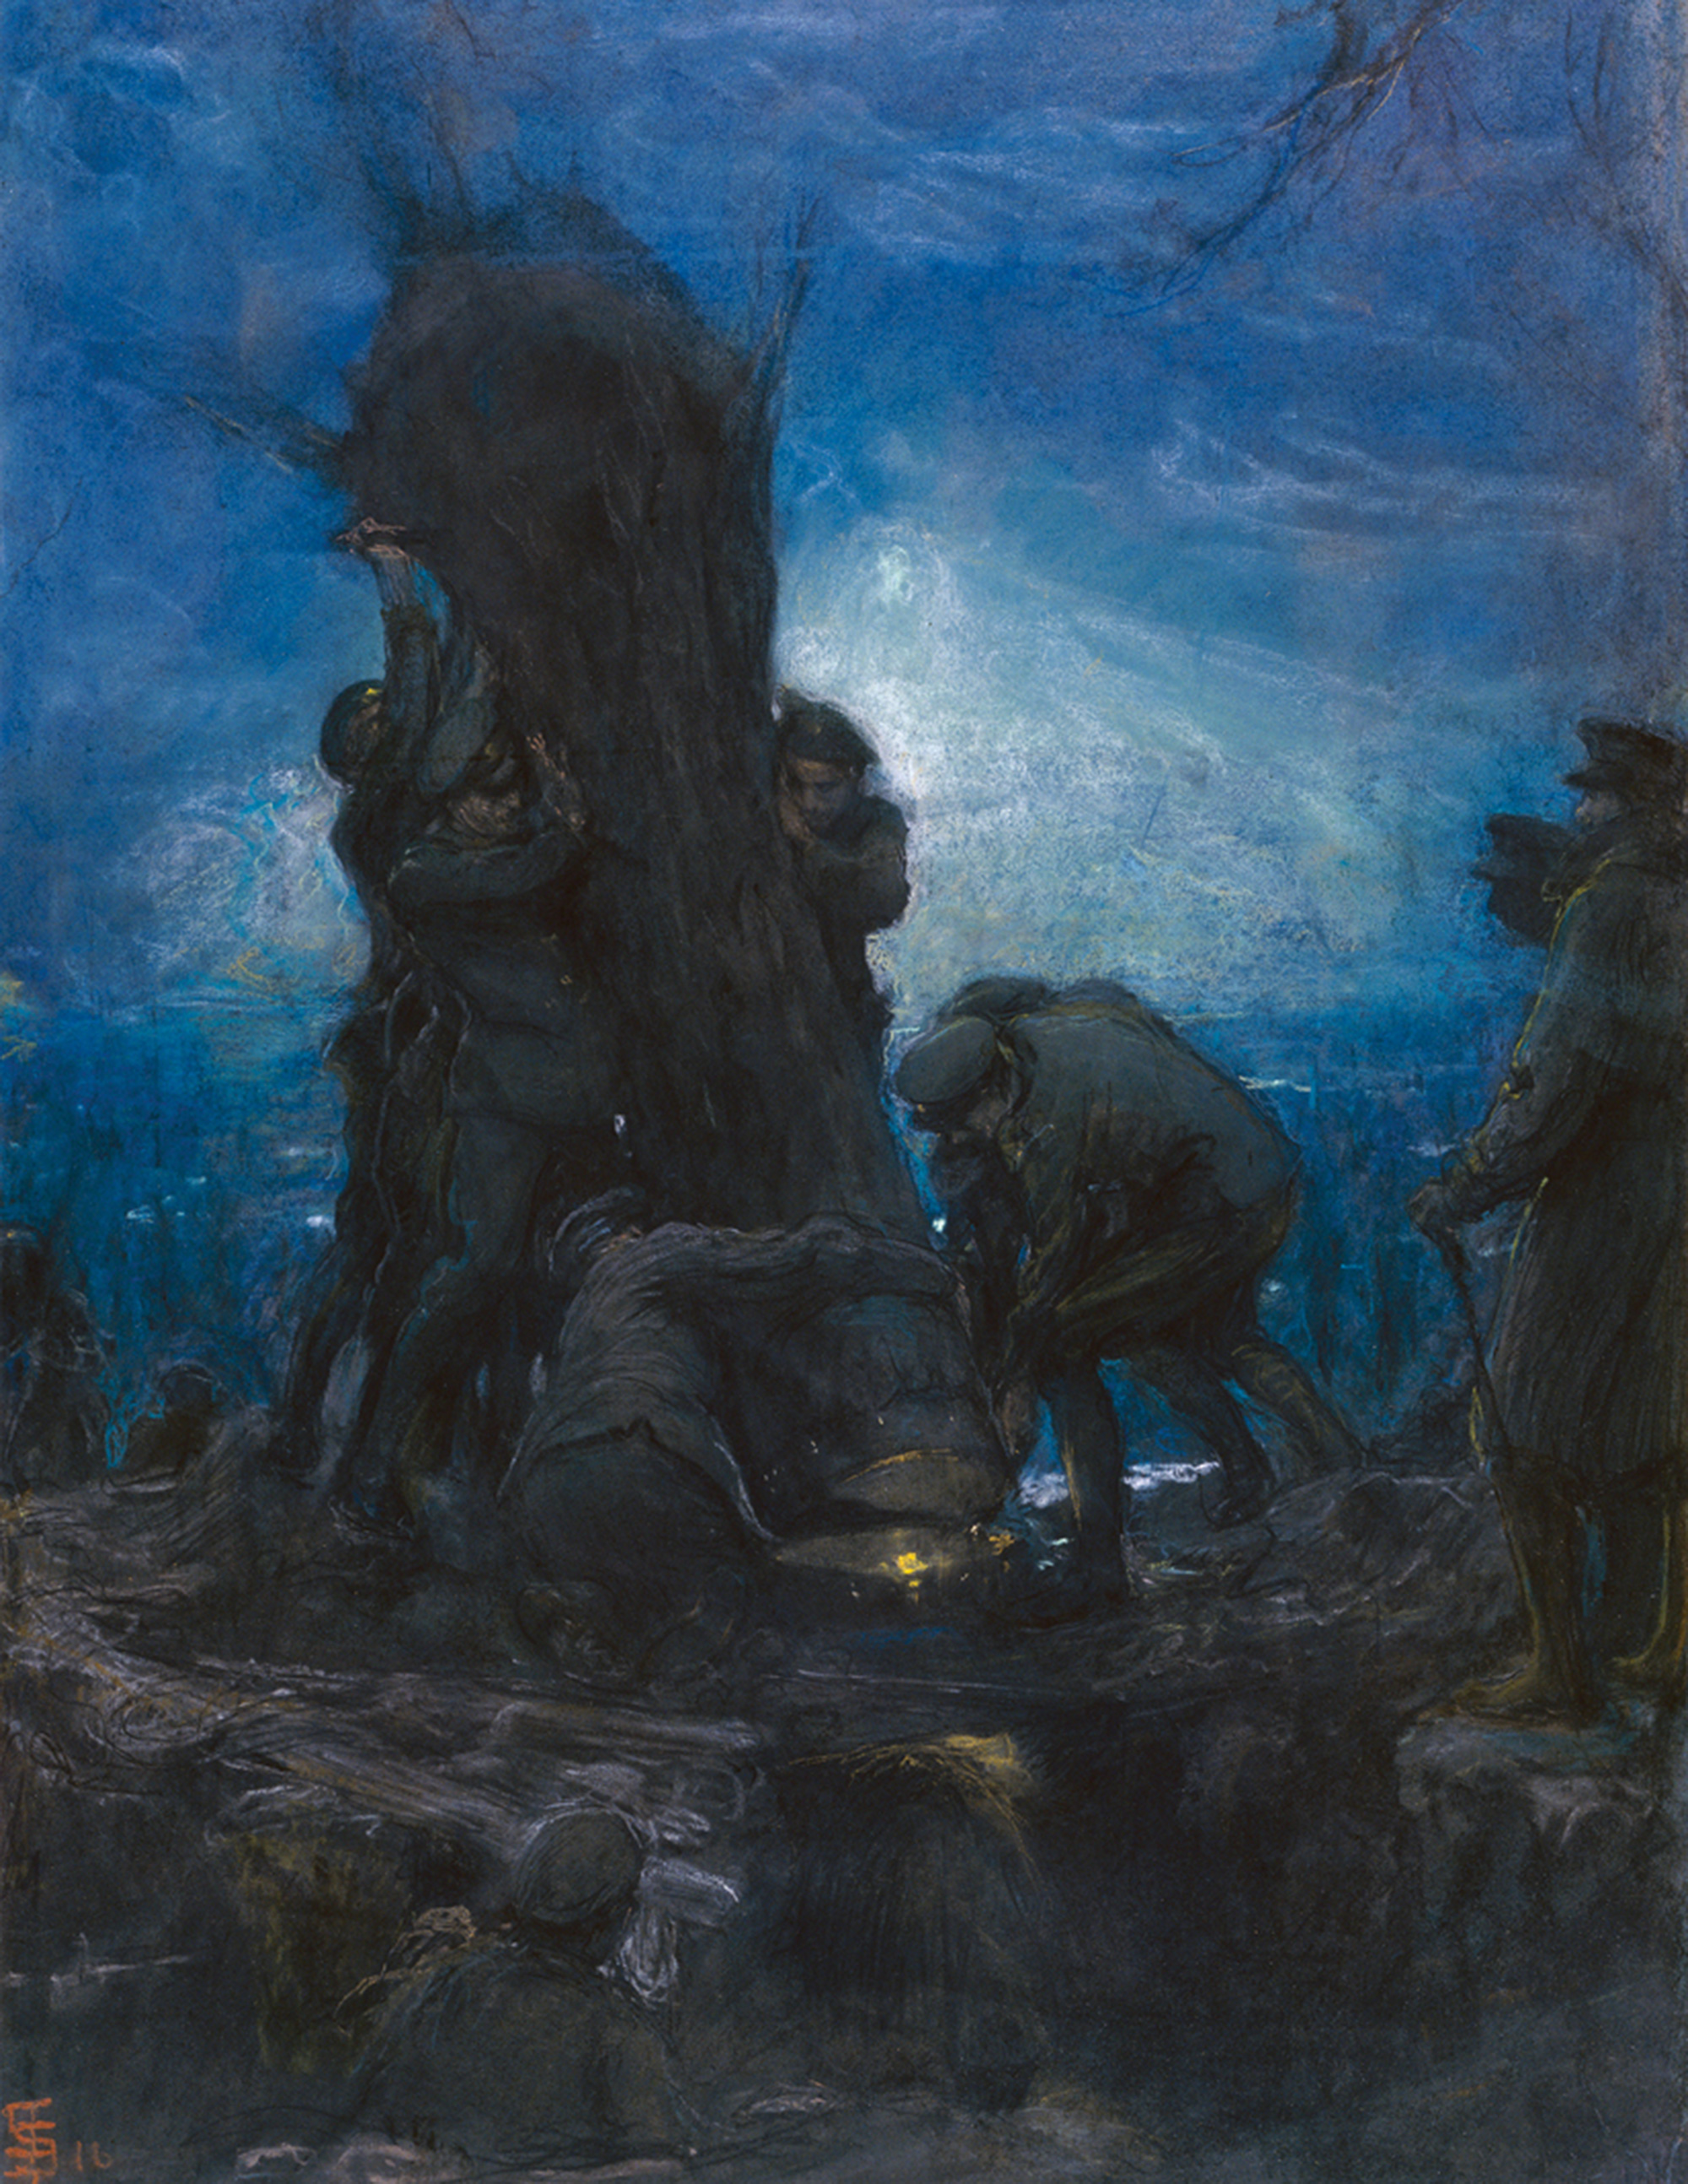 Solomon J. Solomon, Our First O.P. Tree, 1917. Courtesy Imperial War Museum, London.